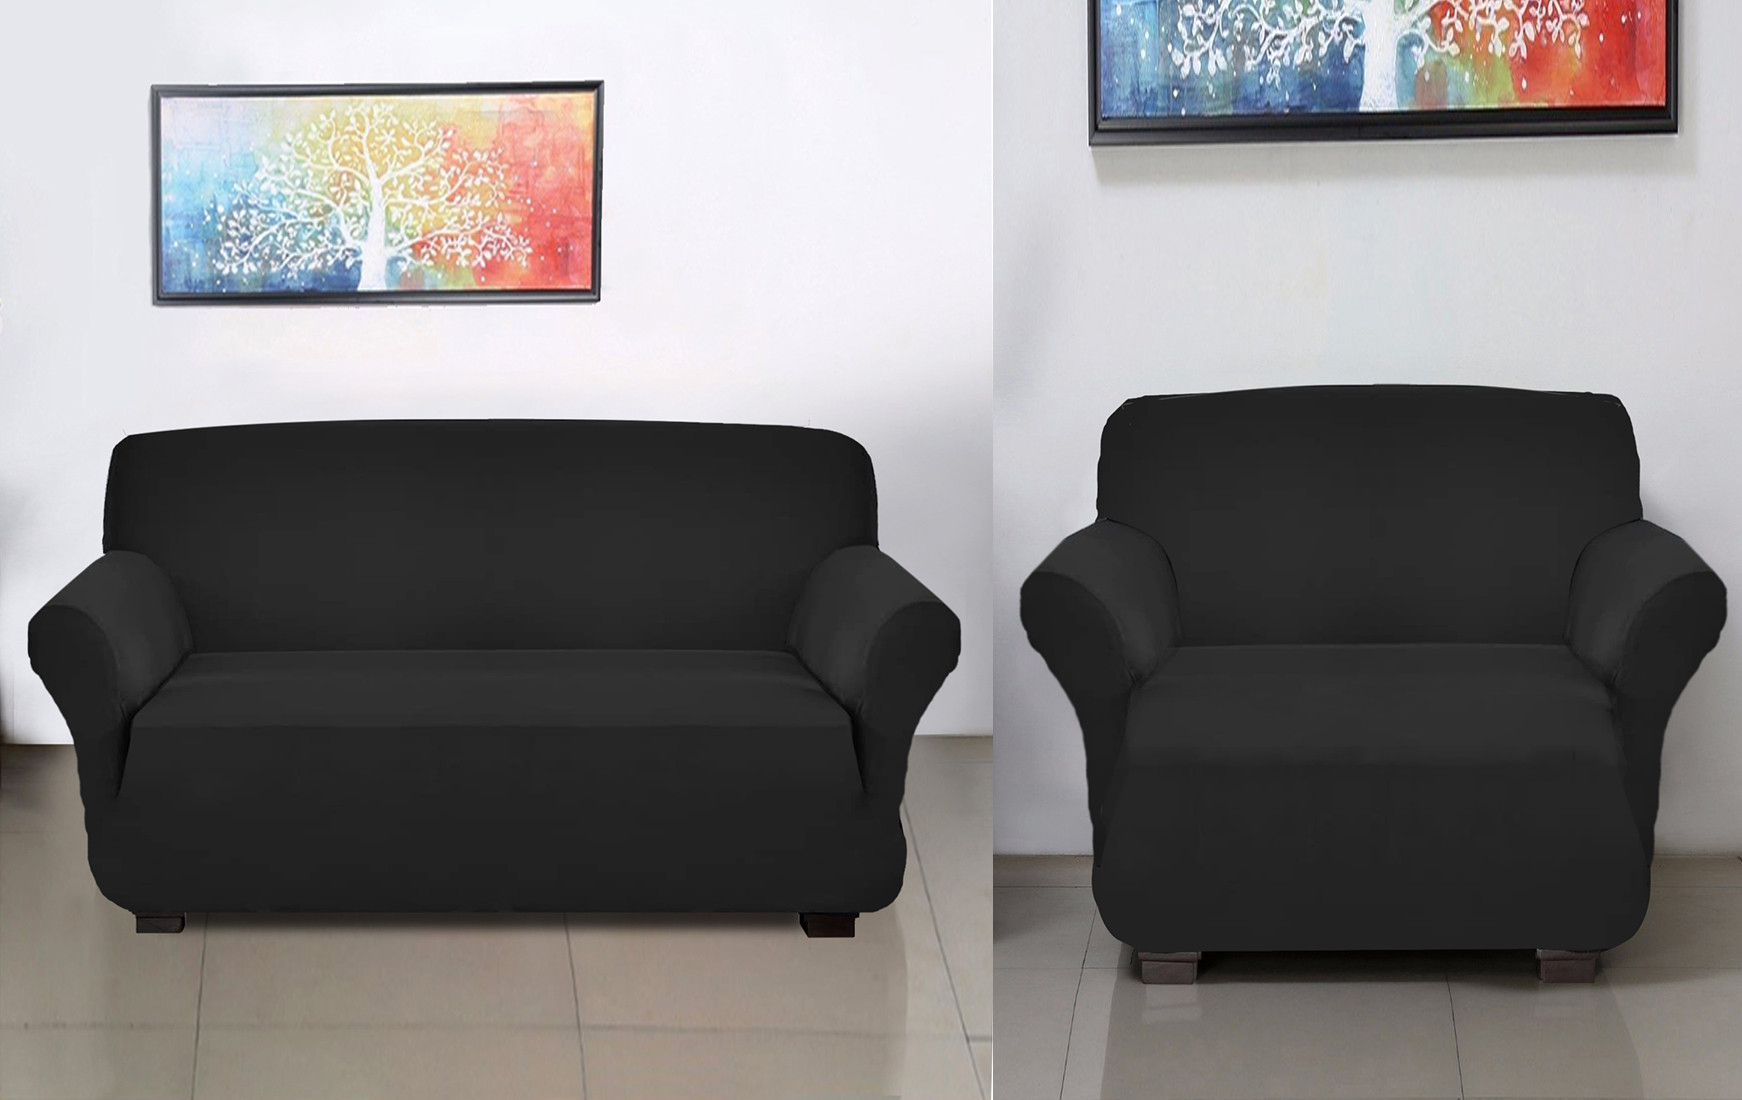 Kuber Industries Stretchable, Non-Slip Polyster 1 & 3 Seater Sofa Cover/Slipcover/Protector Set With Foam Stick, Set of 2 (Black)